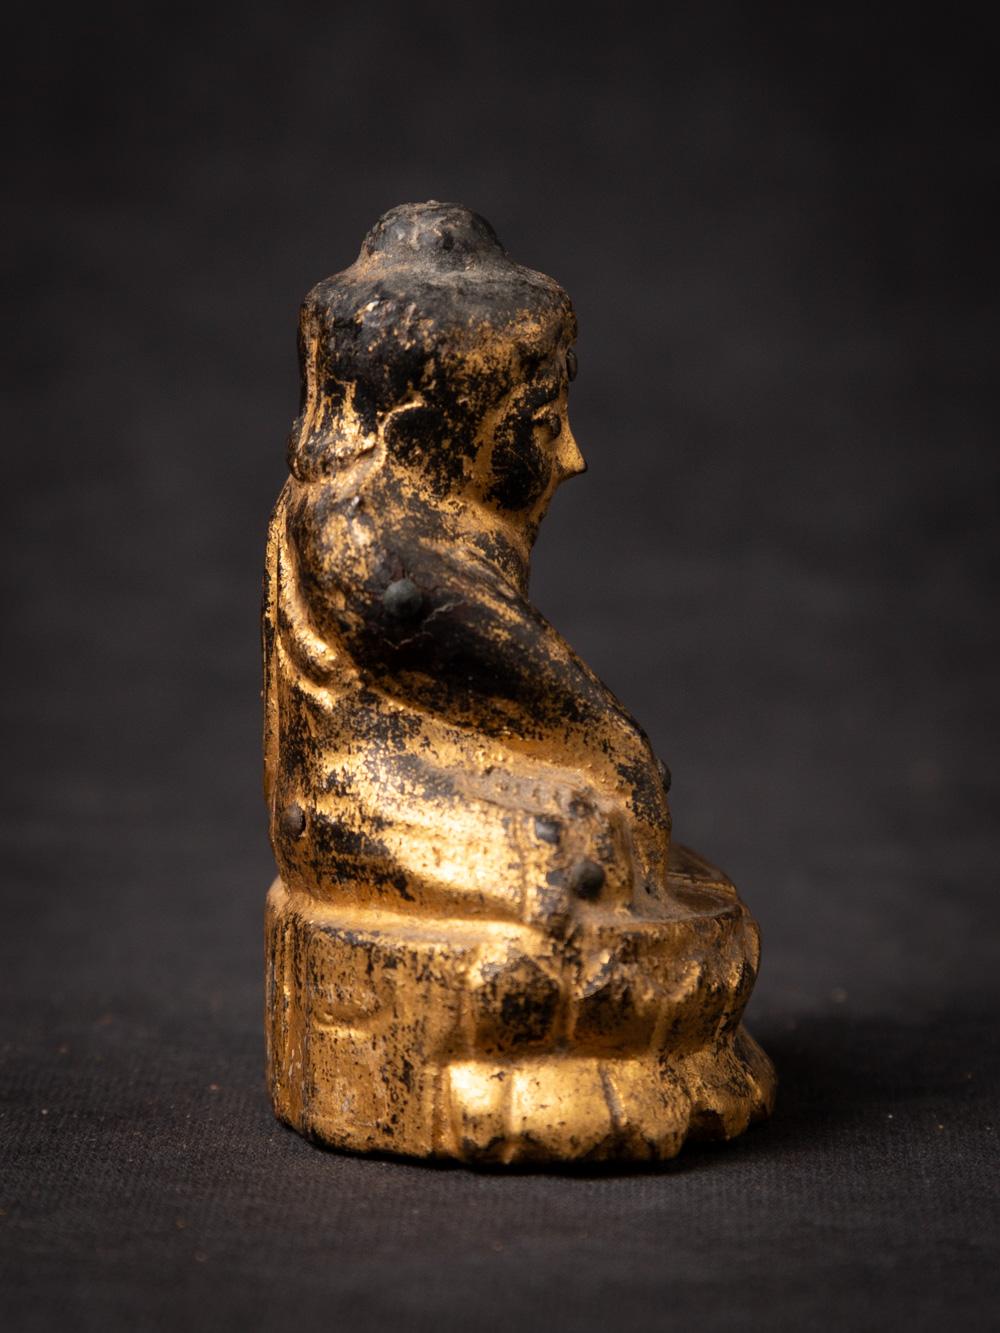 Material : wood
8,2 cm high
6,1 cm wide and 4,5 cm deep
Gilded with 24 krt. gold
Bhumisparsha mudra
19th century
Weight: 60 grams
Originating from Burma
Nr: 2833-2